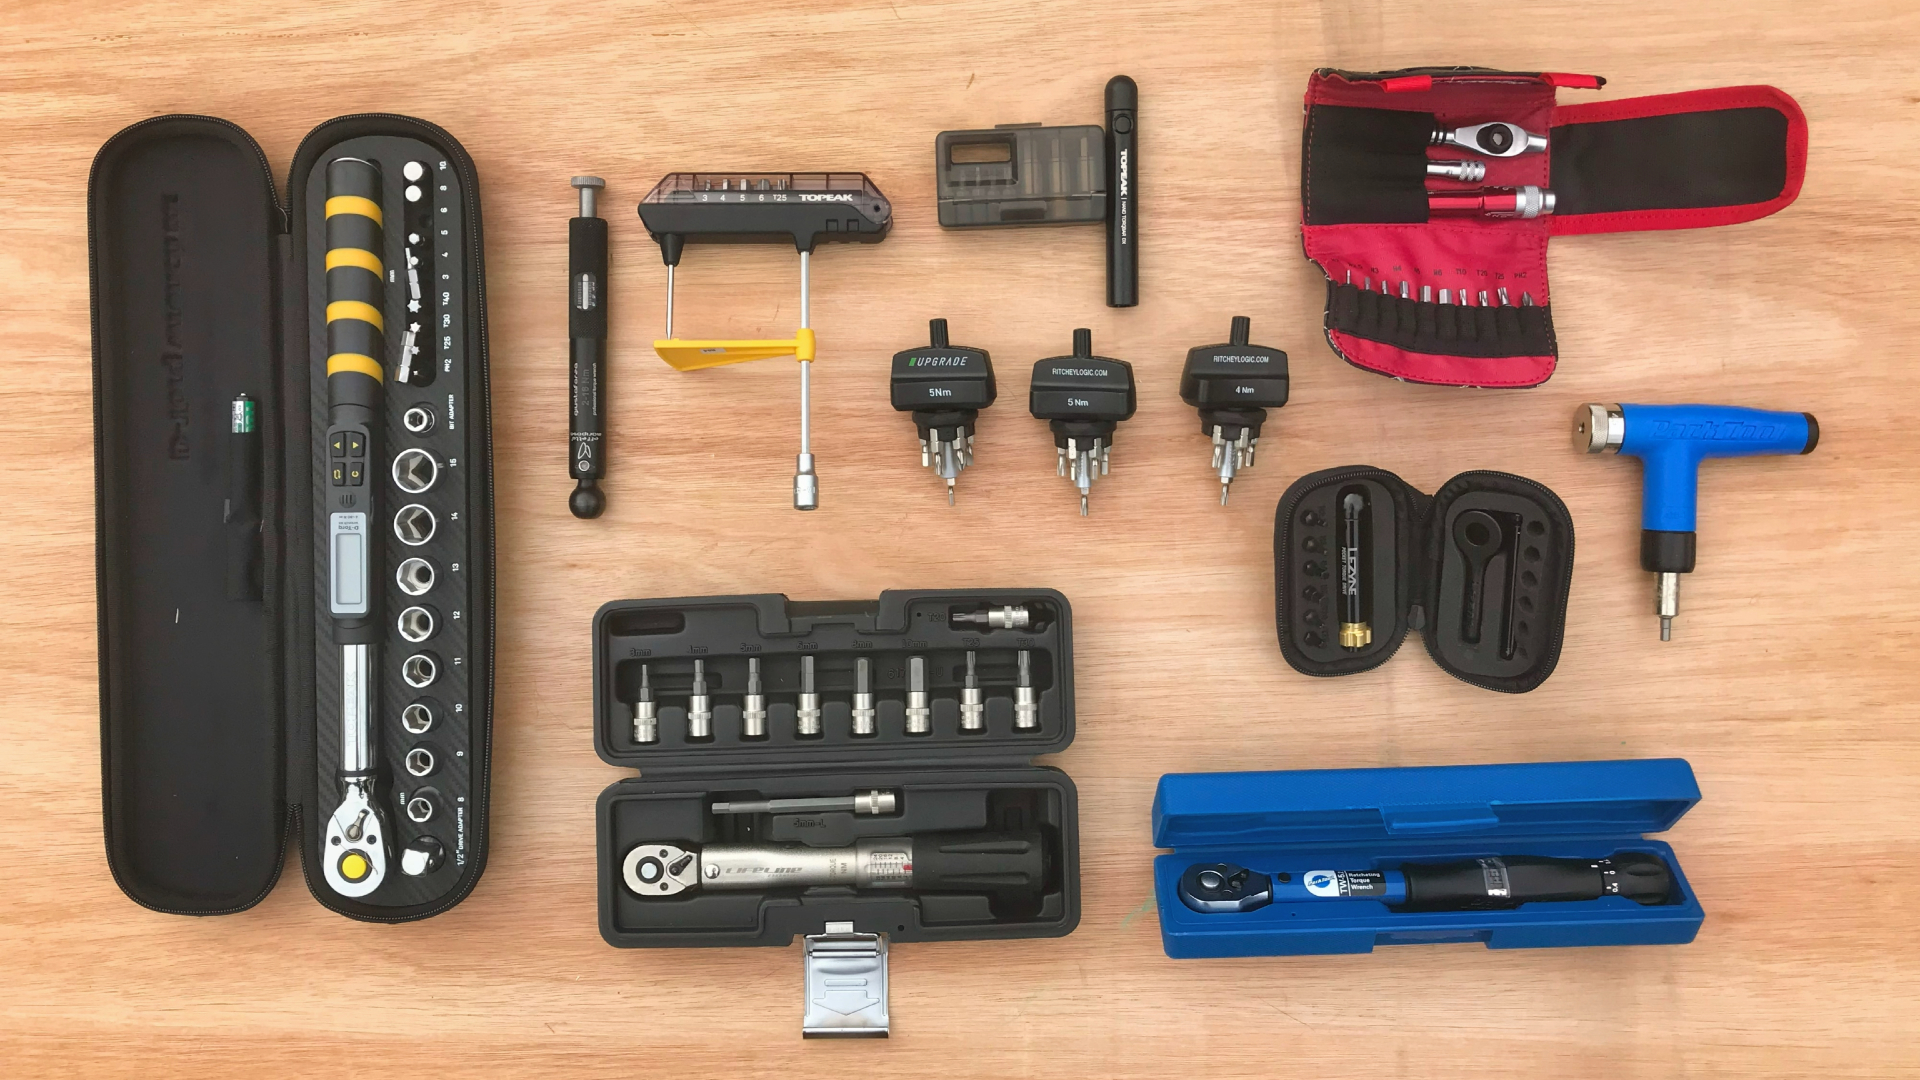 The Best Starter Tool Set for Modelling - It's not what you'd think! 